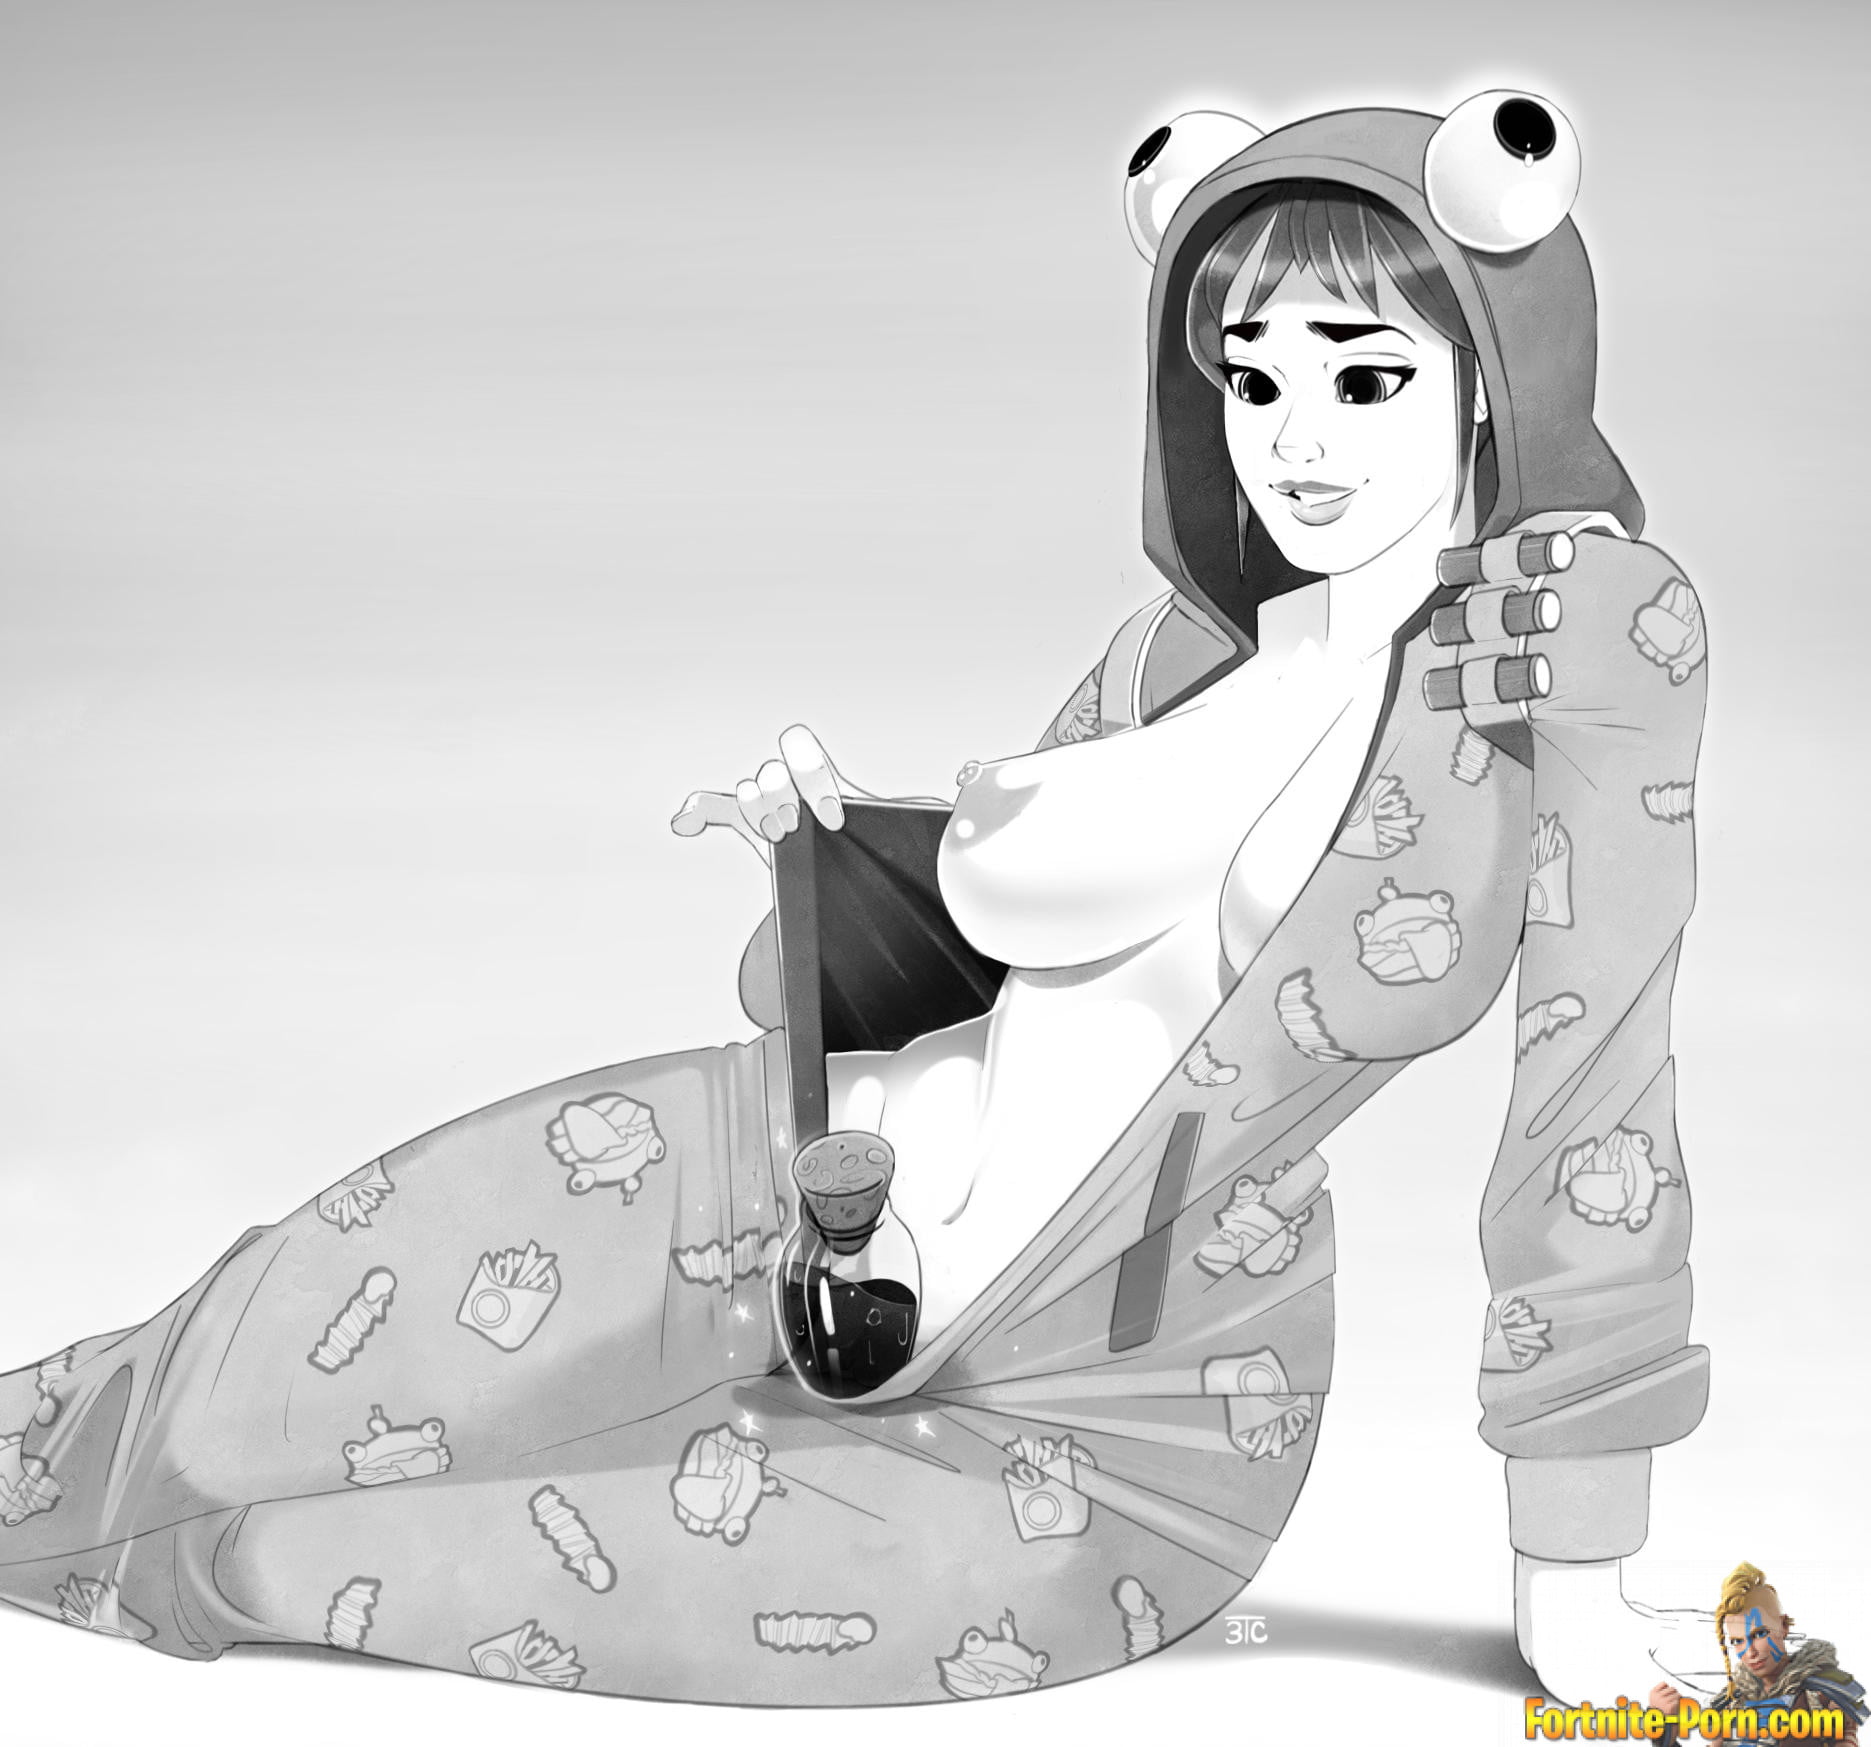 Fortnite onesie hentai - 🧡 Fortnite Onesie Hentai posted by Christopher An...